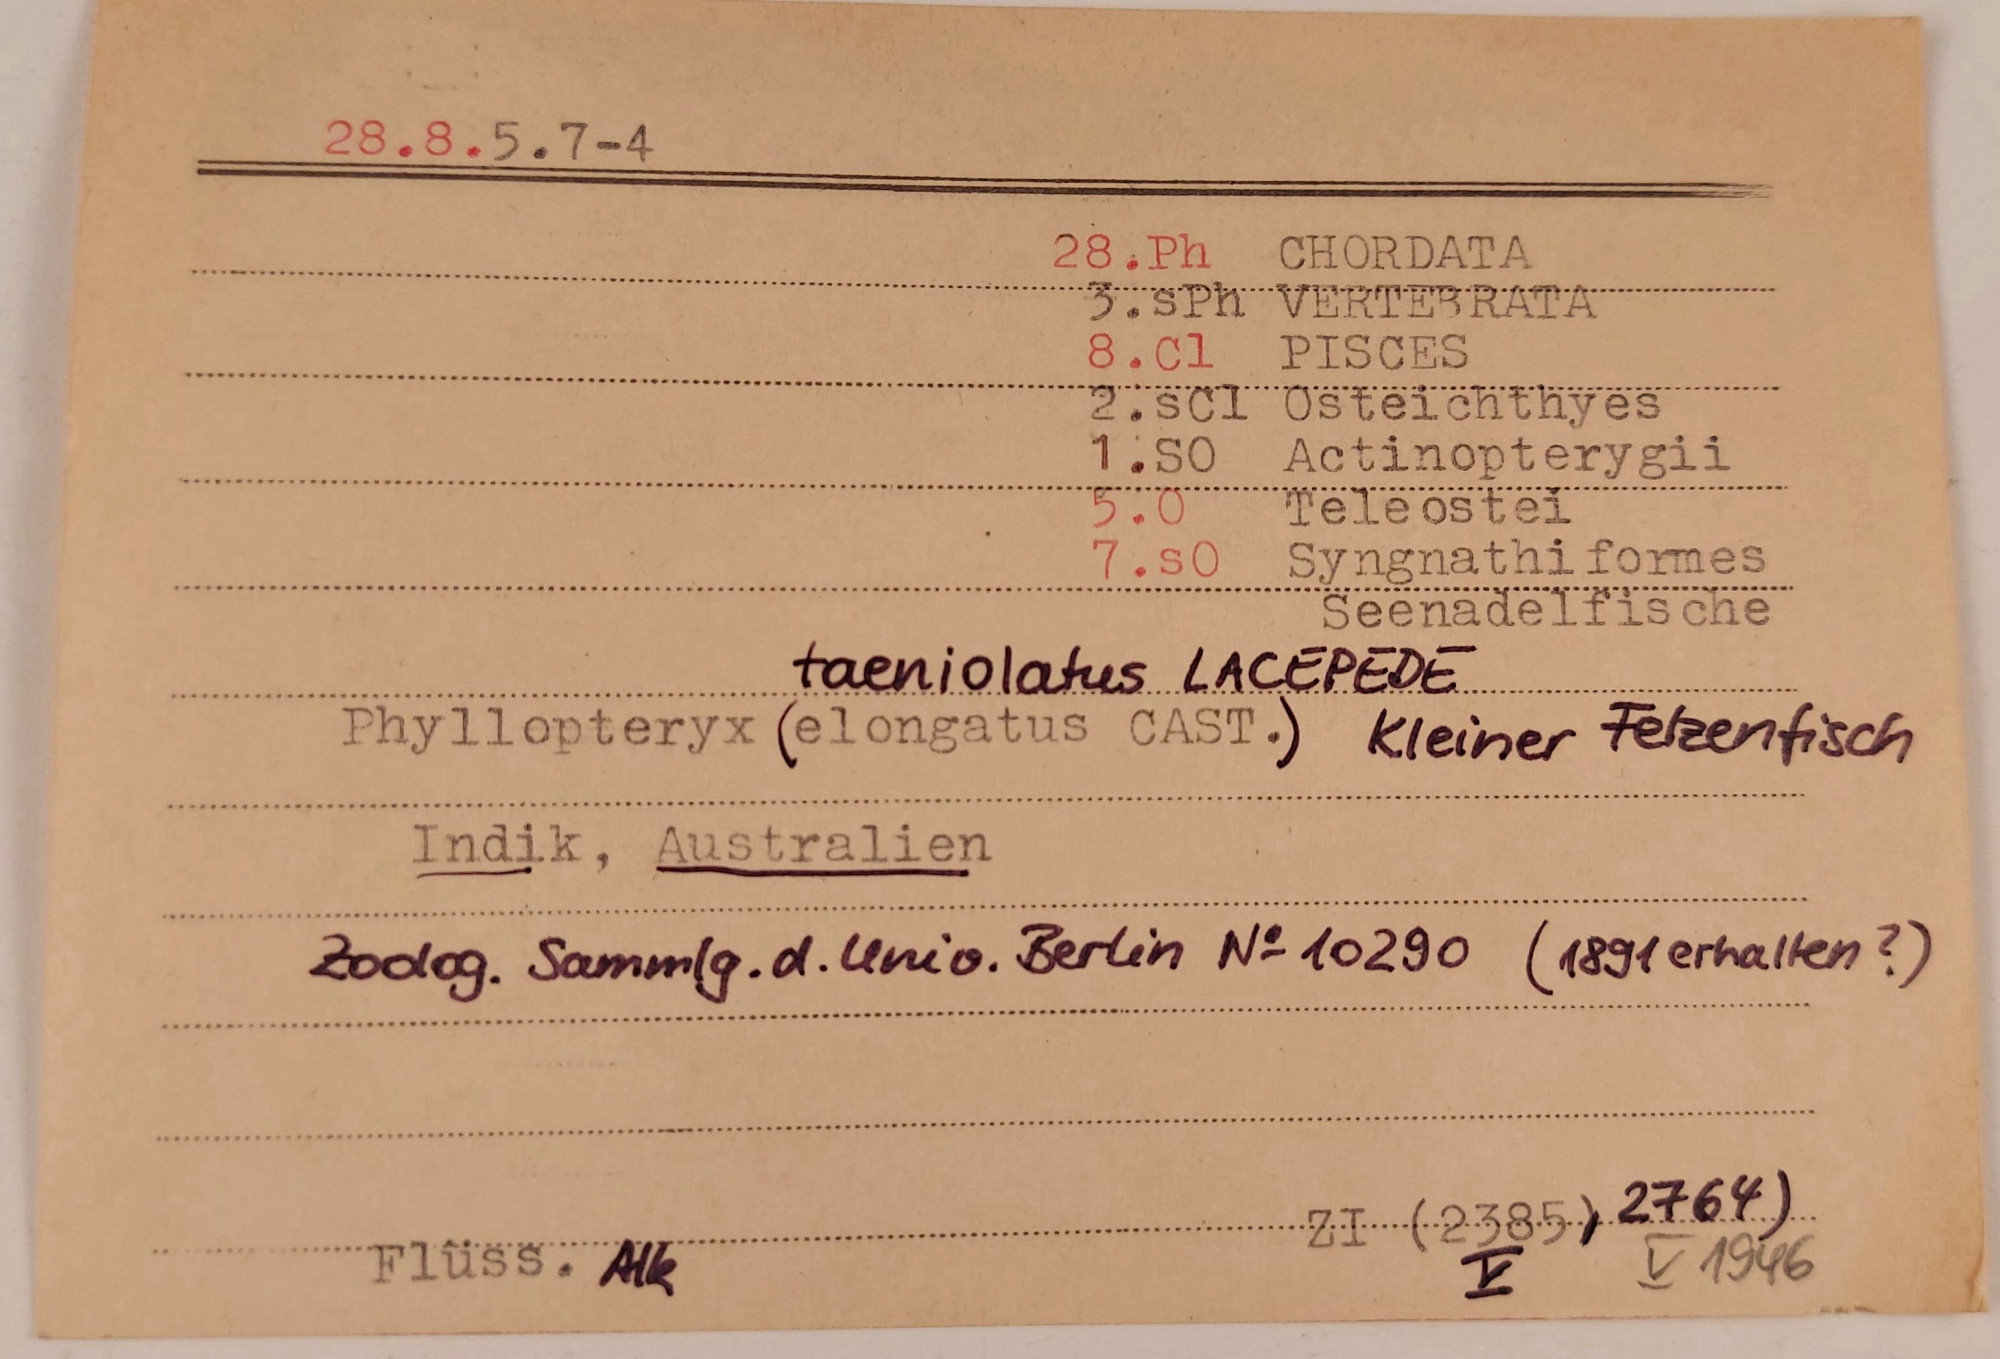 Slightly yellowed index card with typewritten and handwritten entries. For a transcript, see the link in the image caption.